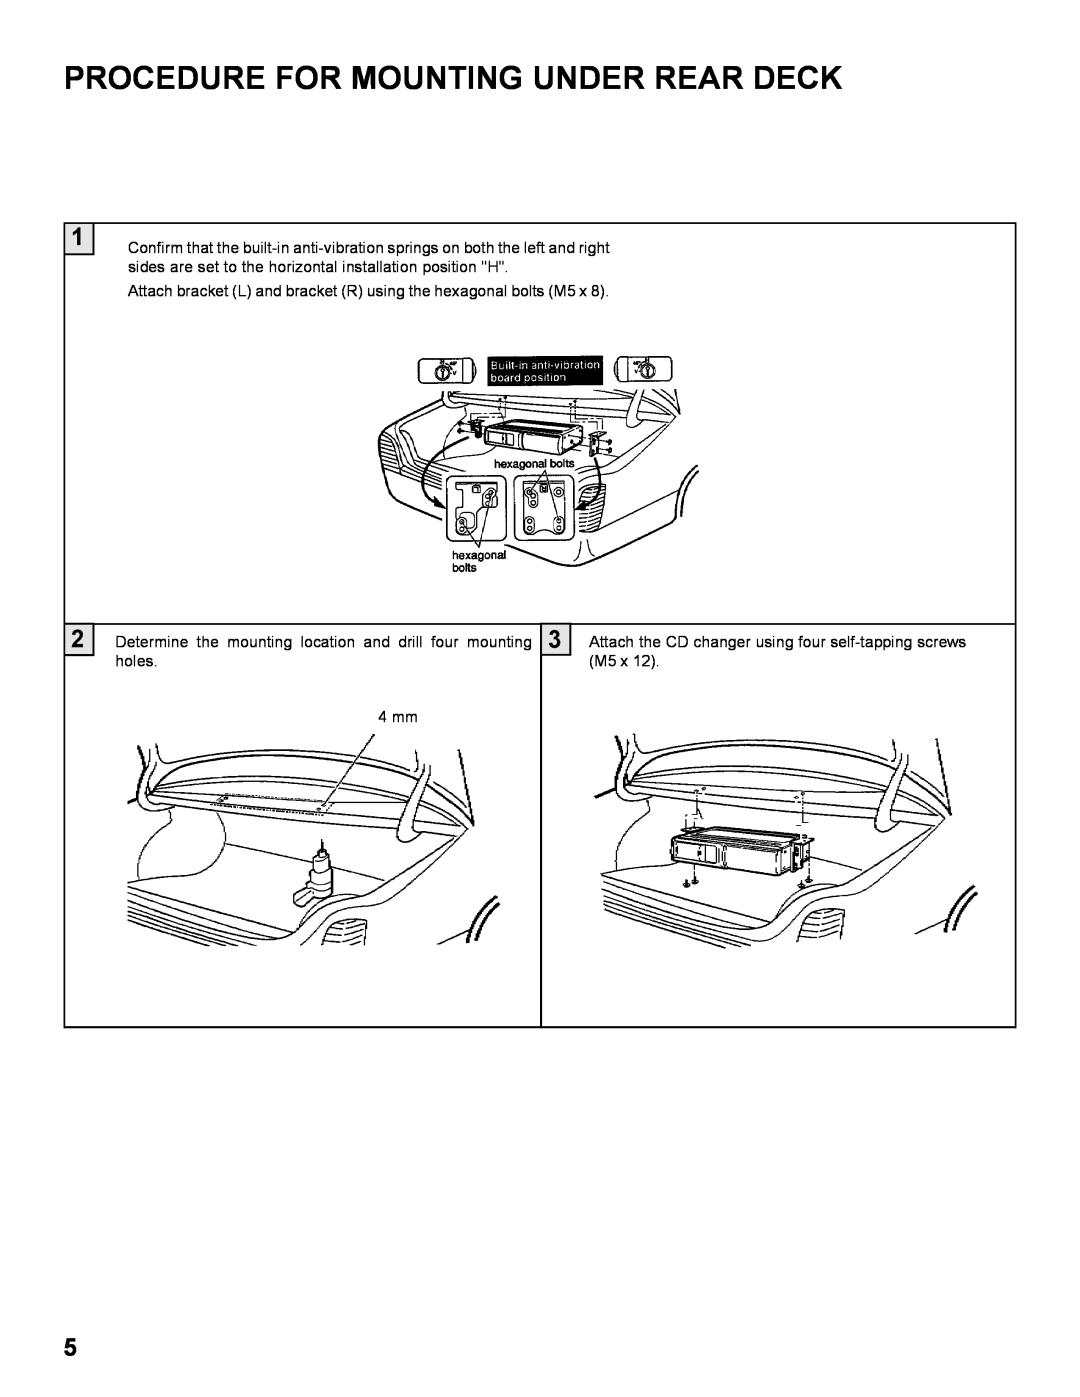 Audiovox SP-6CD installation manual Procedure For Mounting Under Rear Deck 